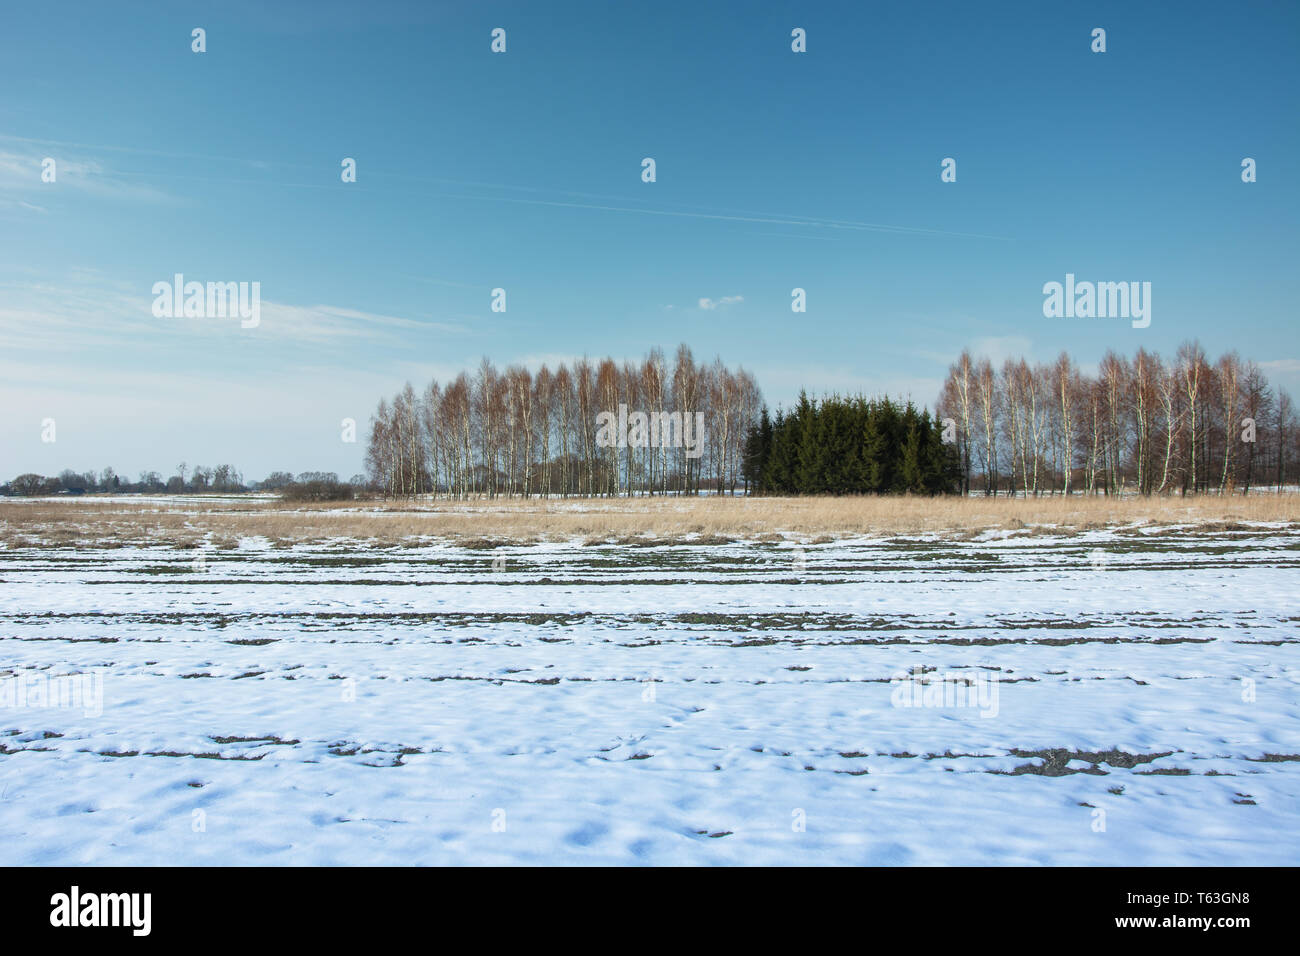 Melting snow on a field of trees growing in a row and clear blue sky Stock Photo